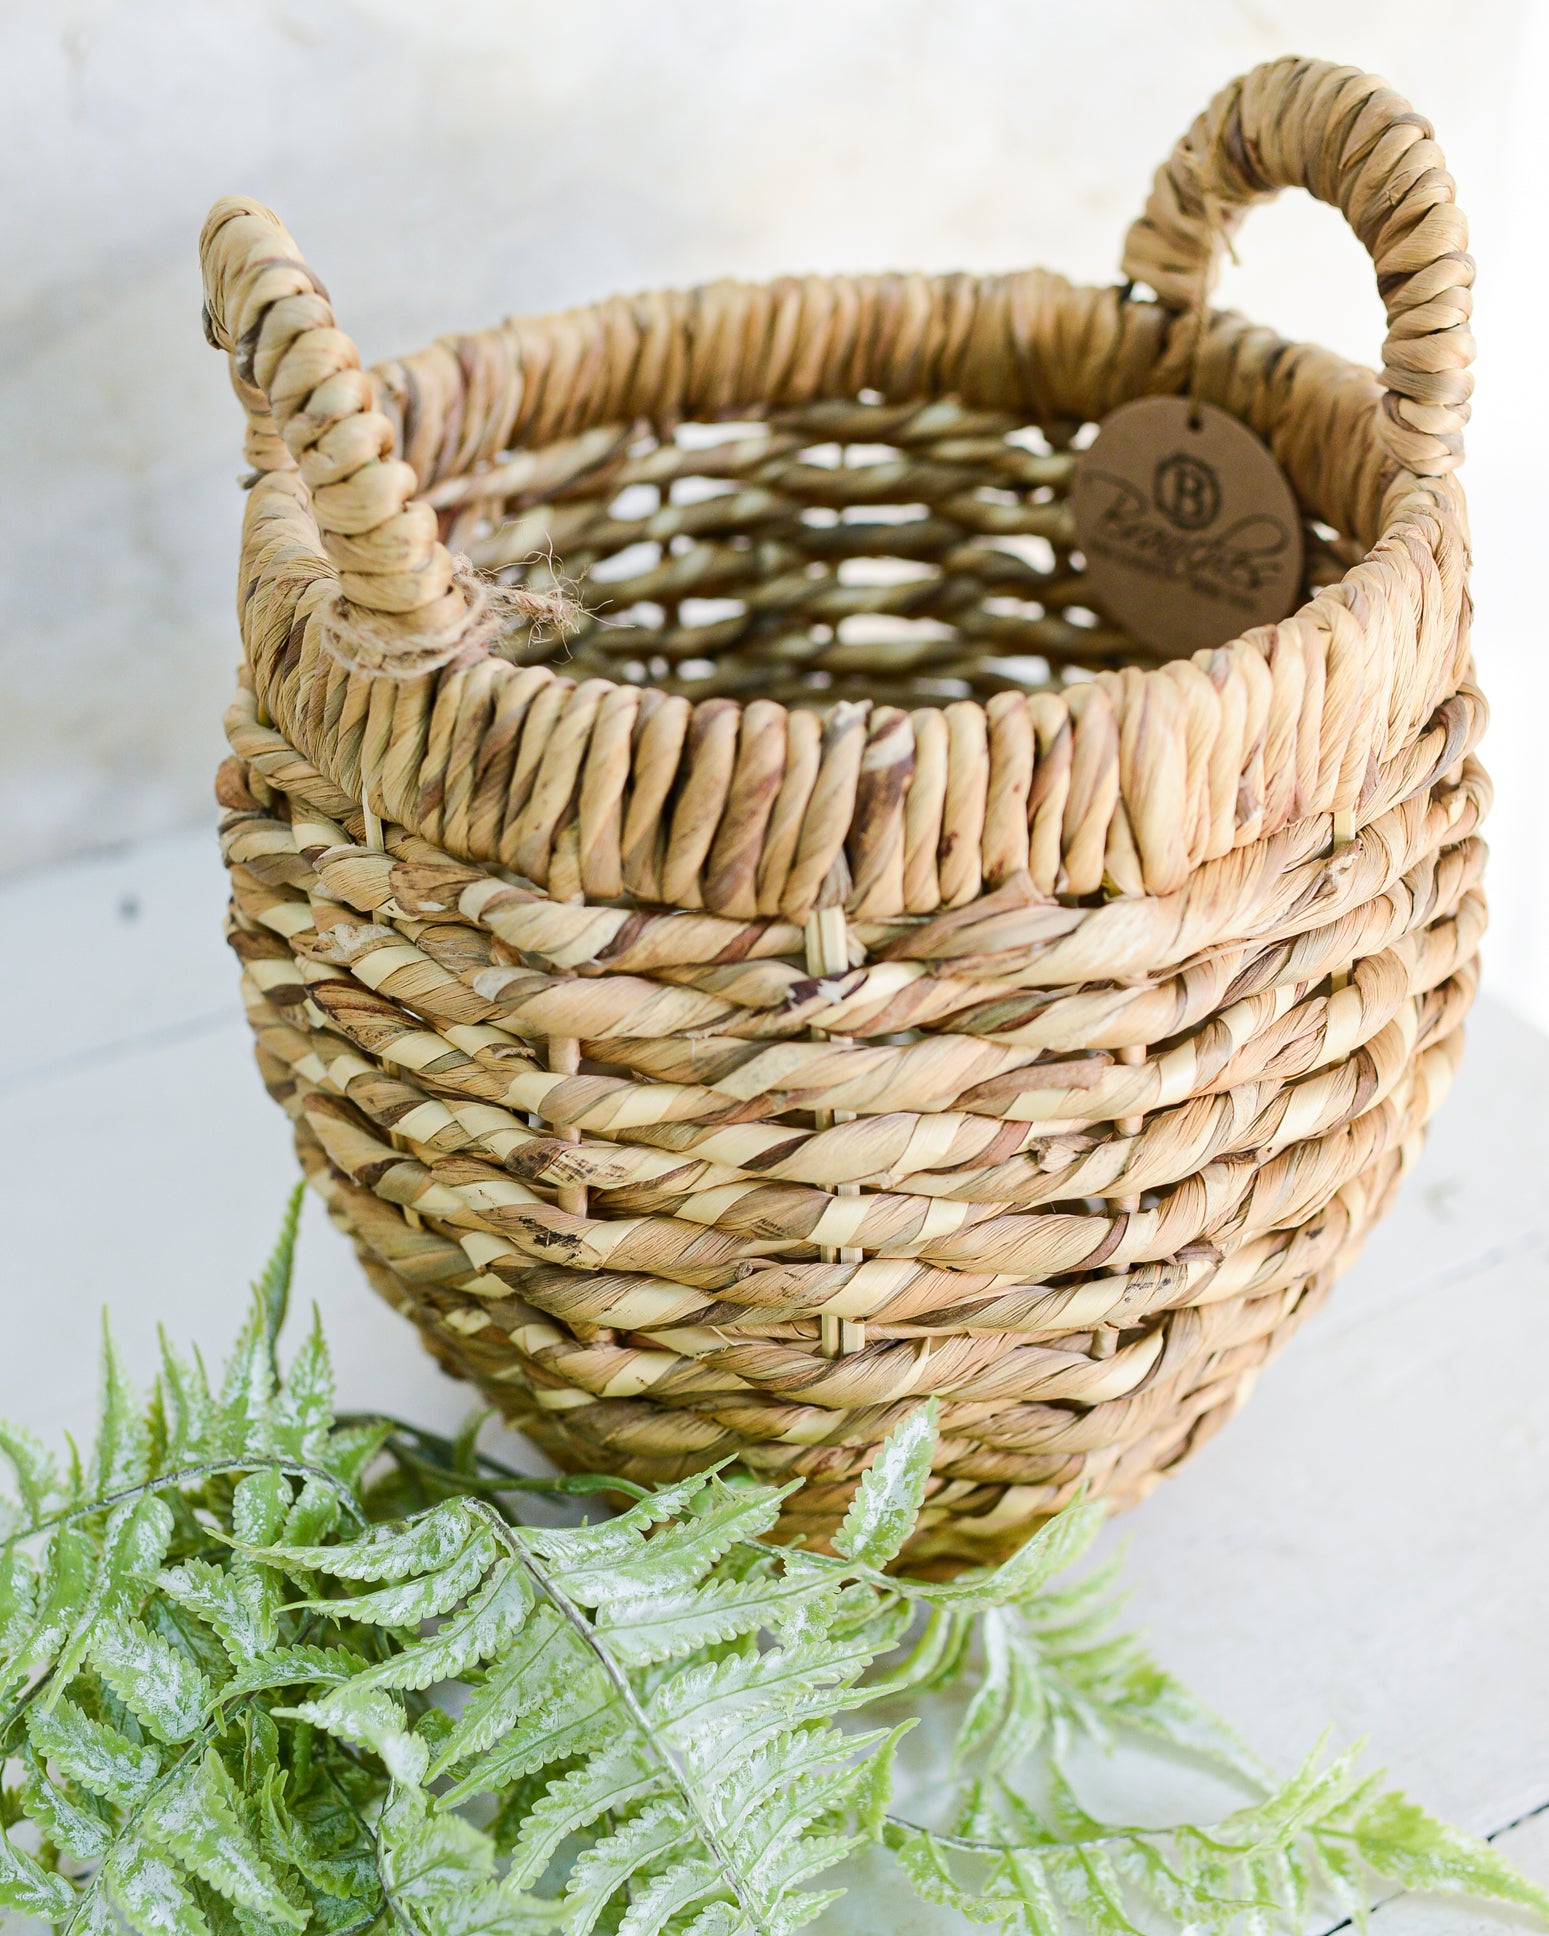 Chunky Woven Basket Varies by Size